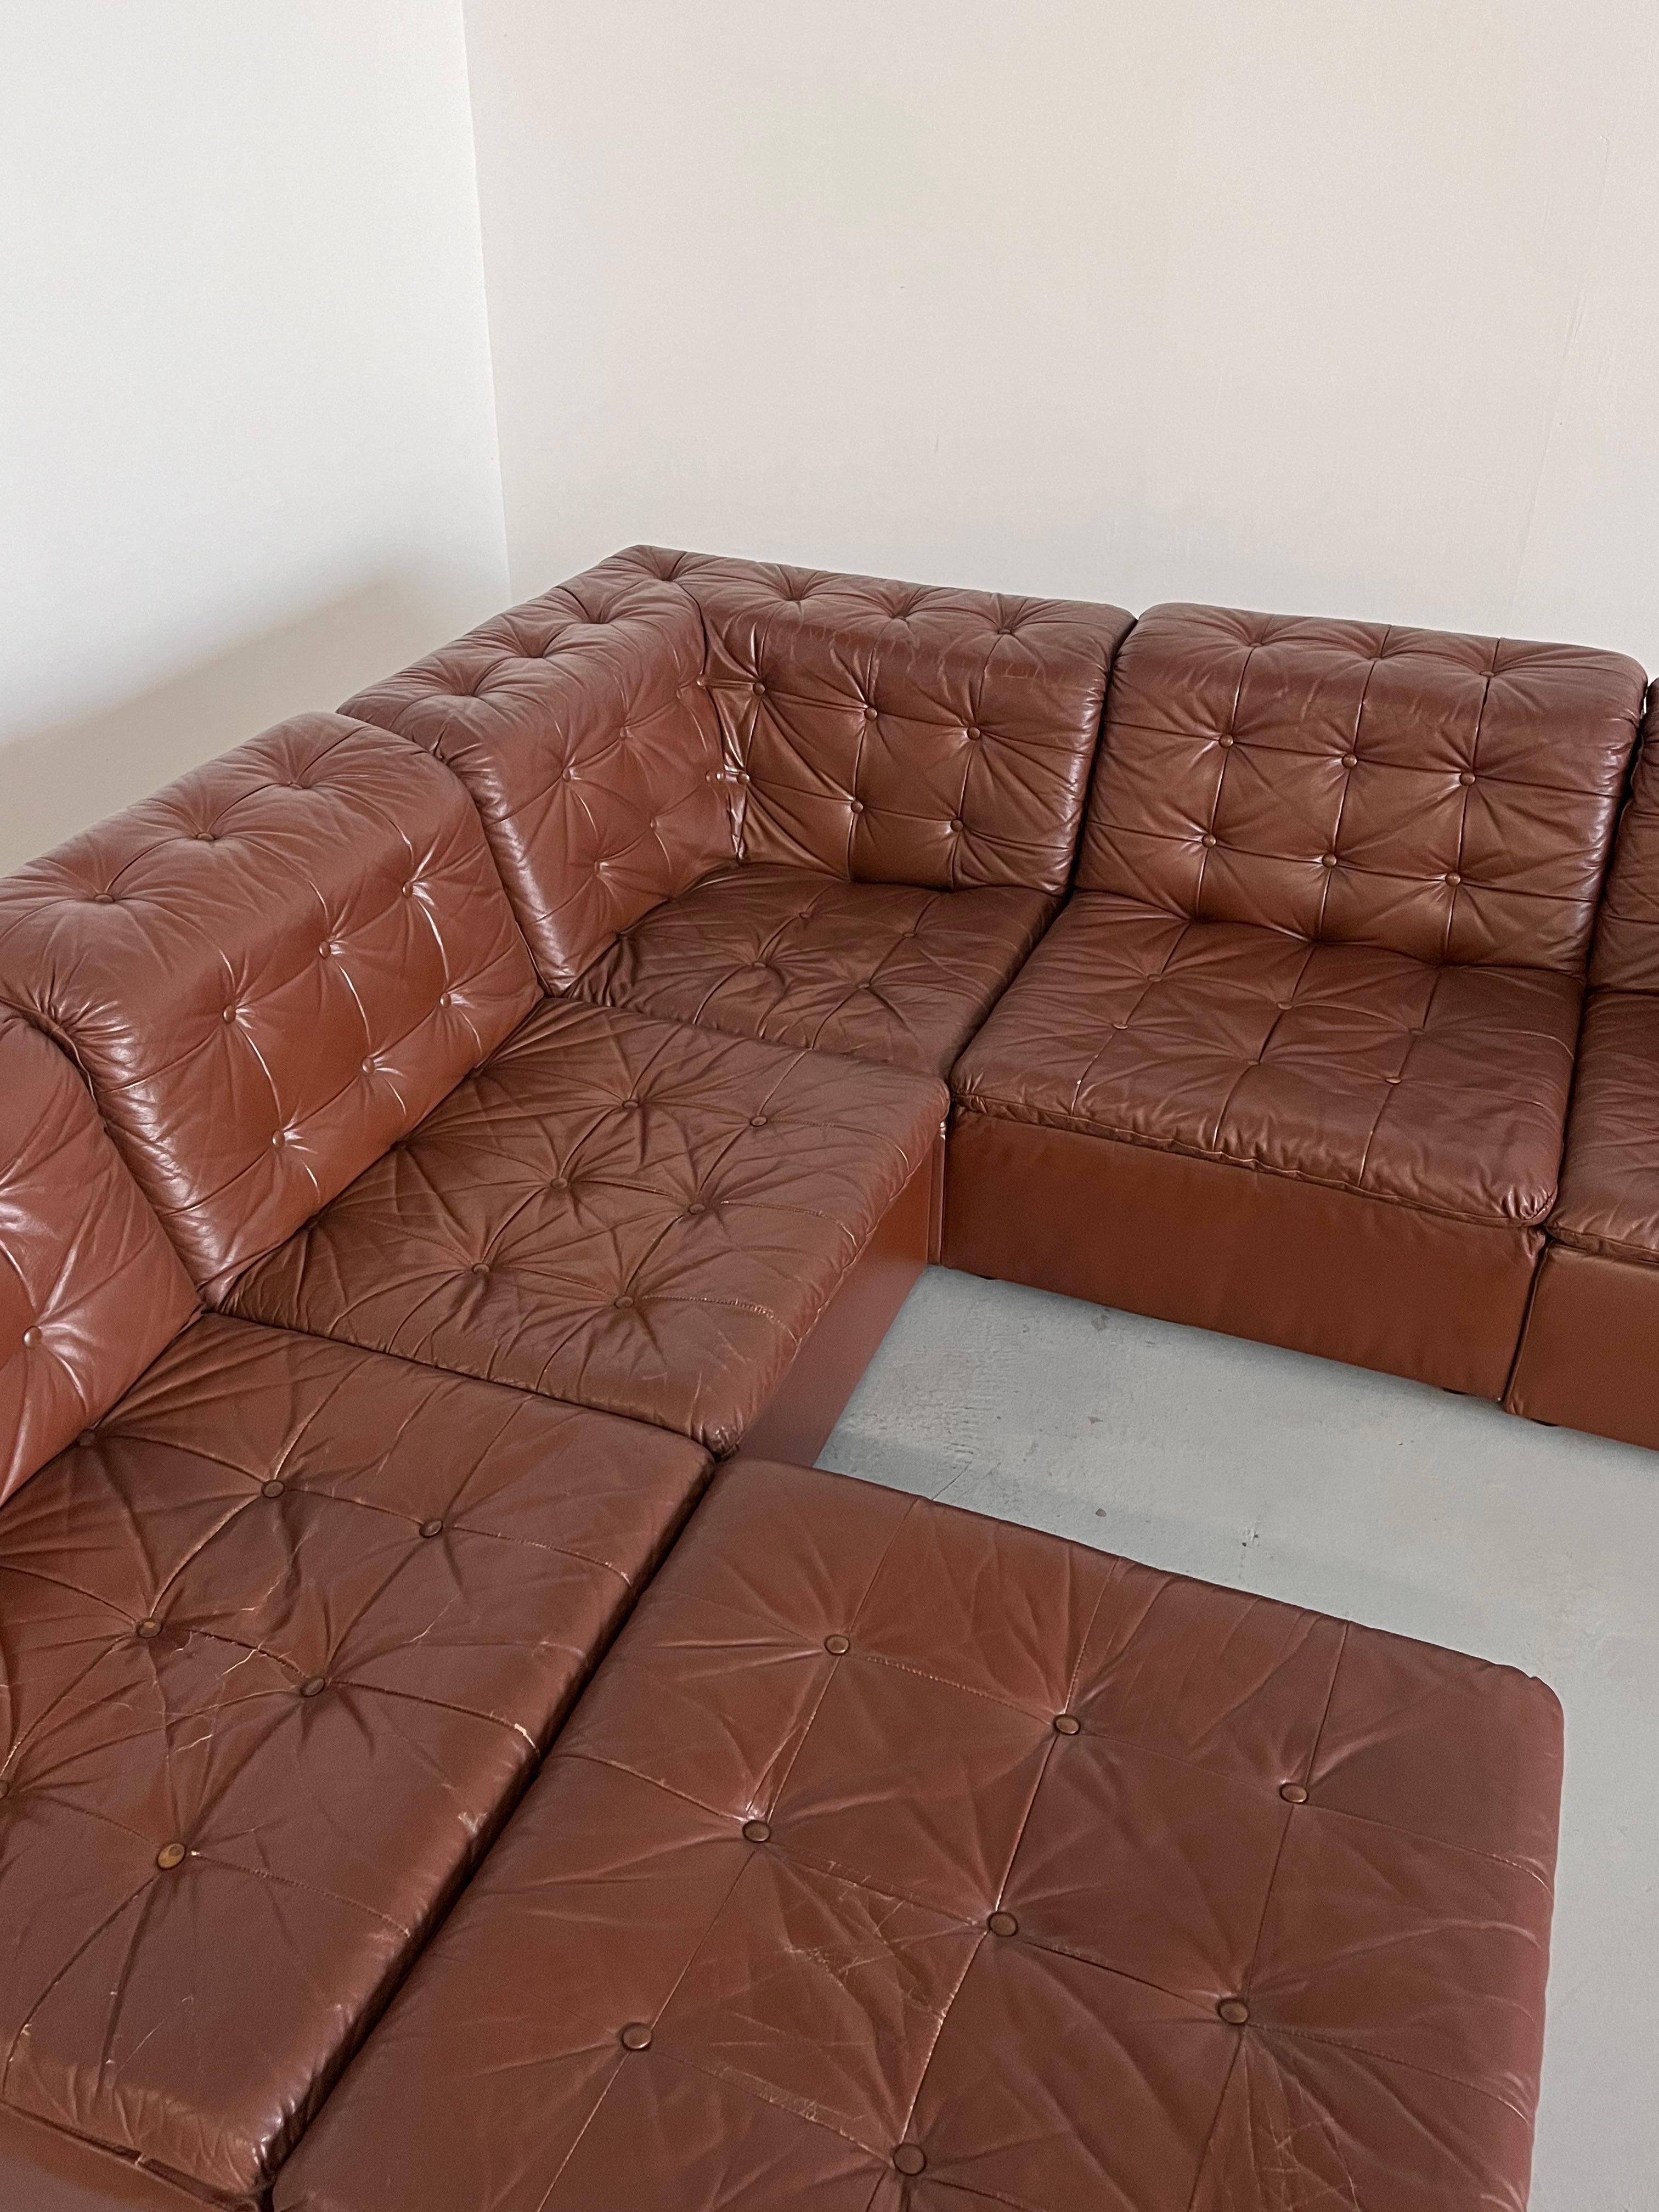 Vintage Patchwork Cognac Leather Six-Part Modular Sofa by Laauser, 1970s Germany For Sale 7